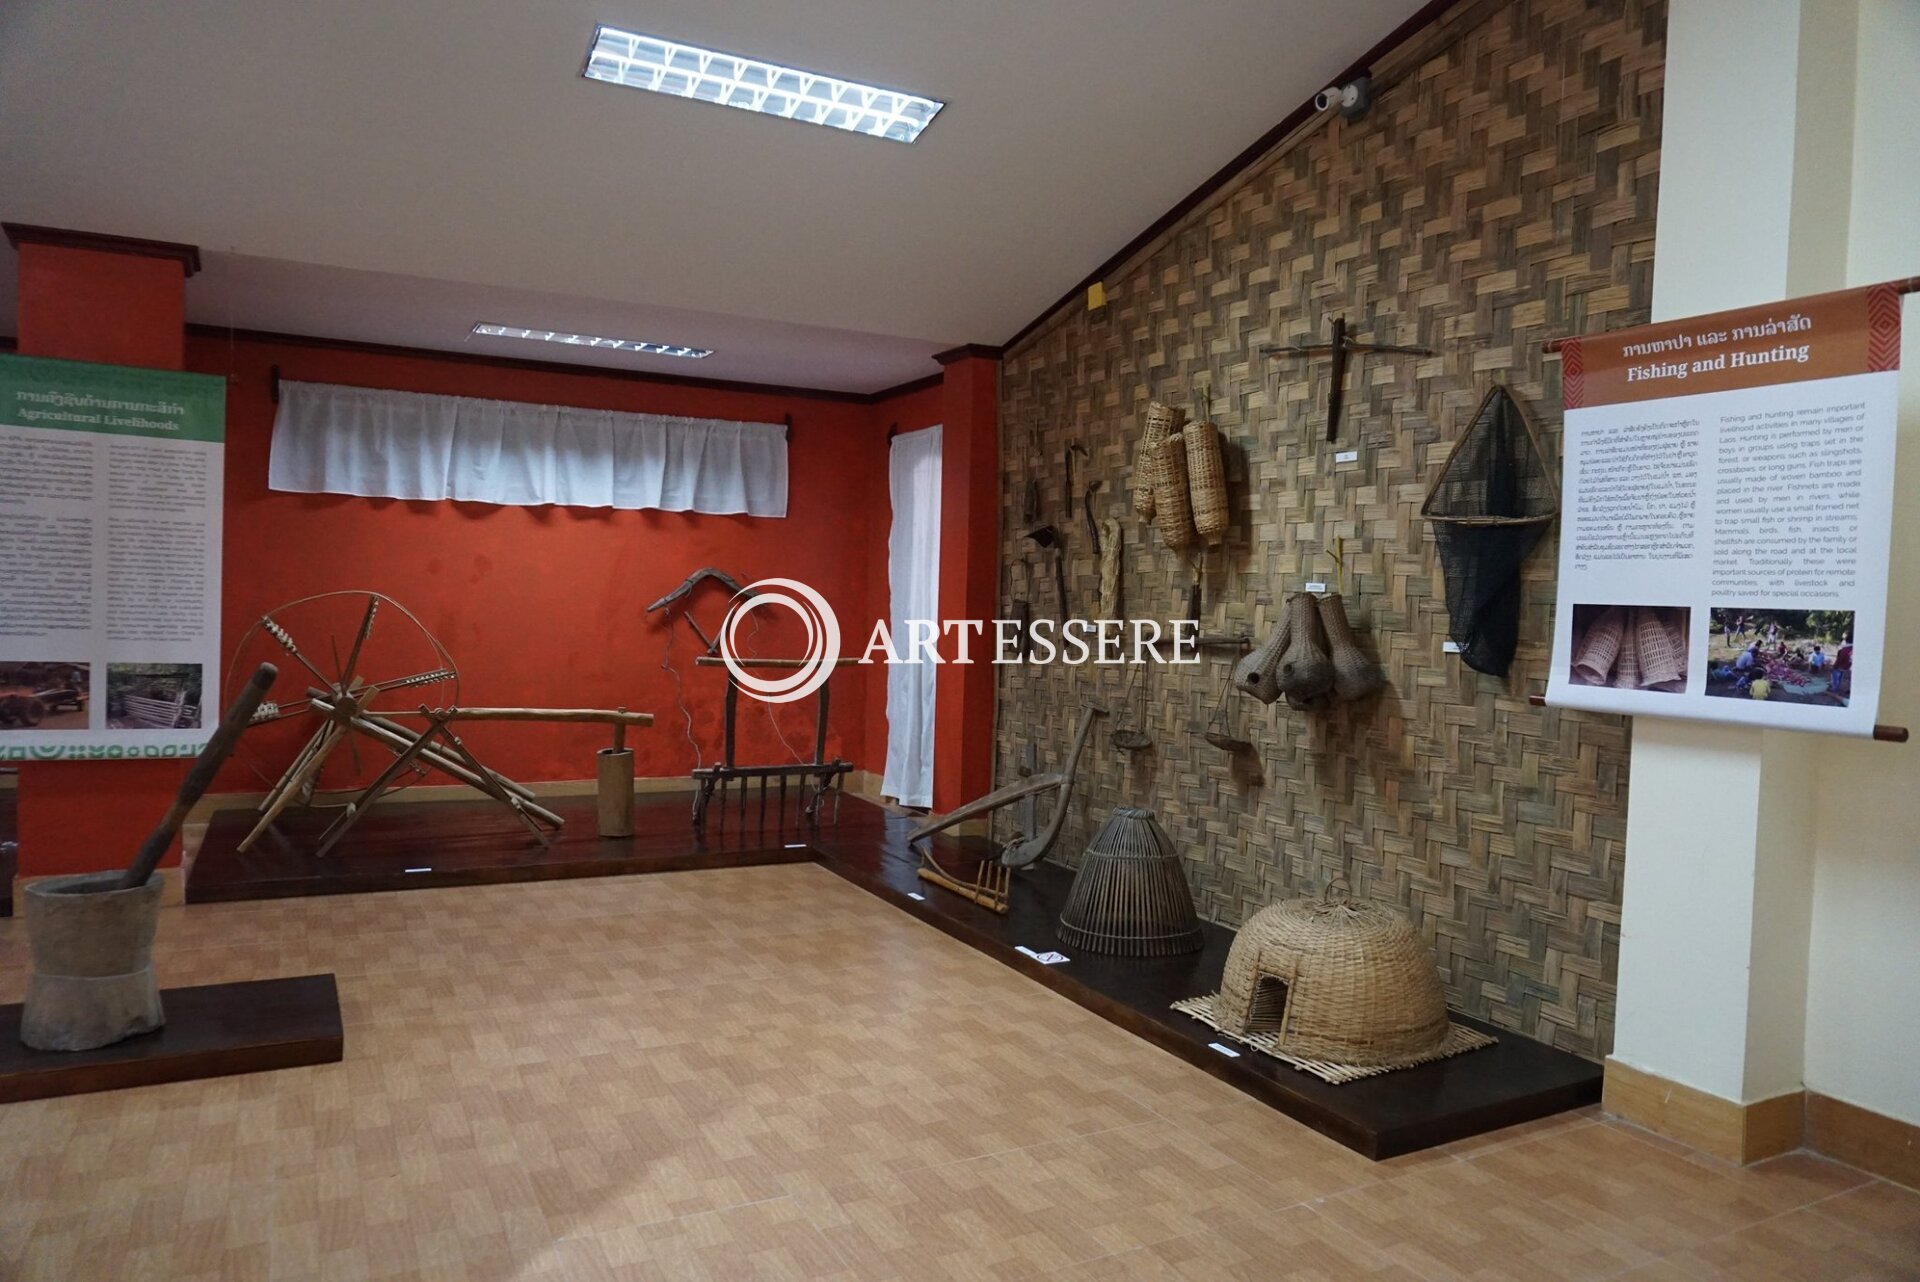 Traditional Arts and Ethnology Centre